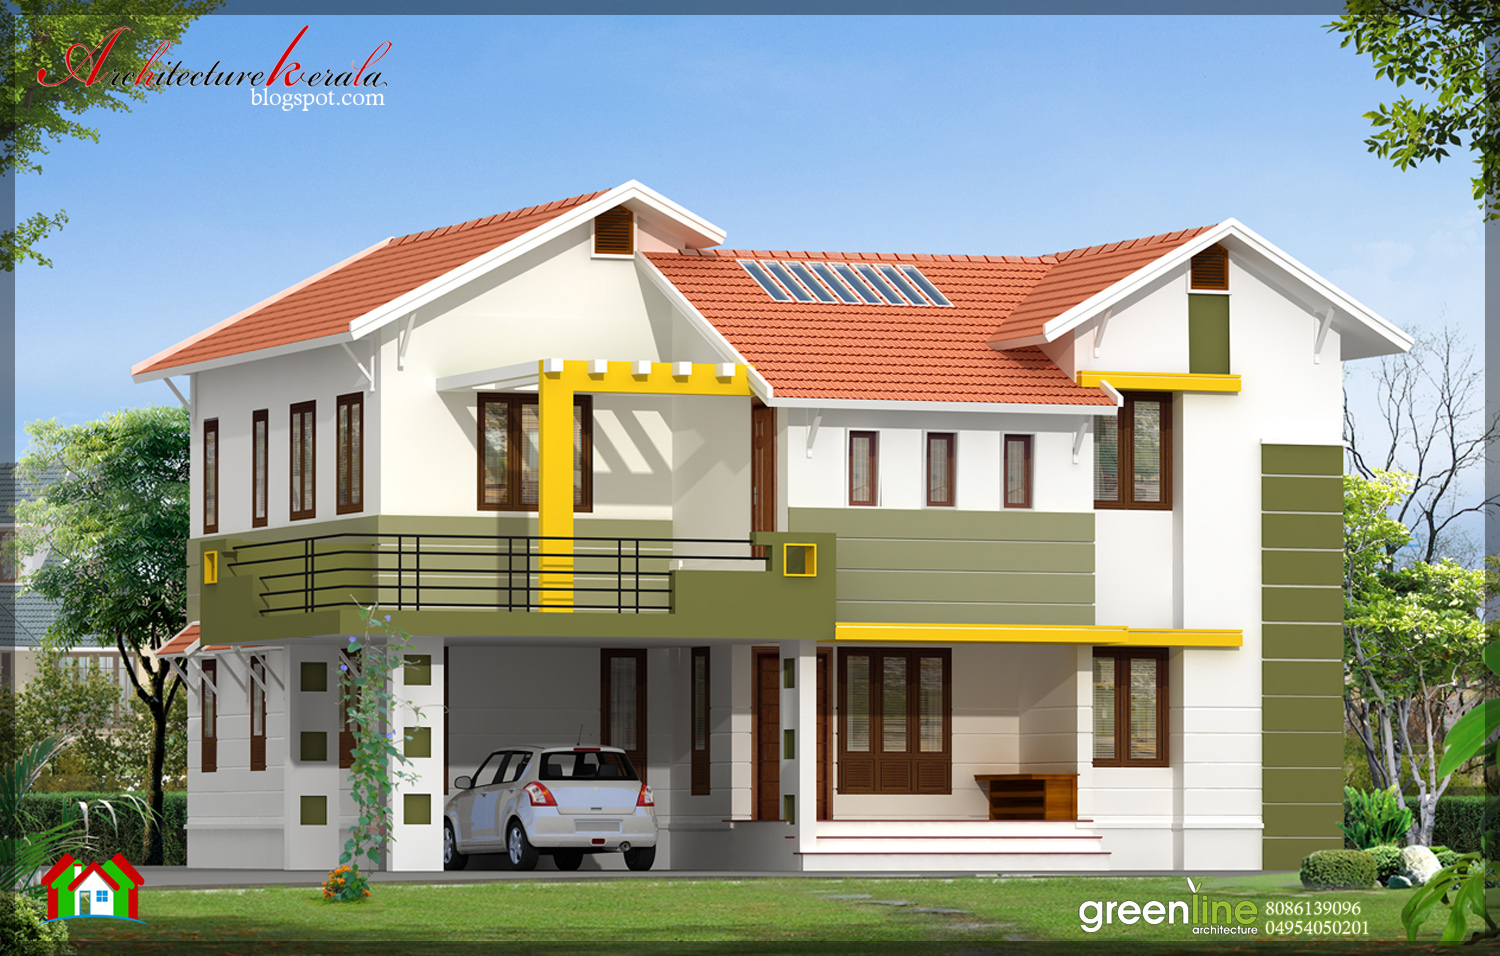 4 BHK CONTEMPORARY STYLE INDIAN HOME ELEVATION DESIGN IN 2430 Sq Ft  ARCHITECTURE KERALA